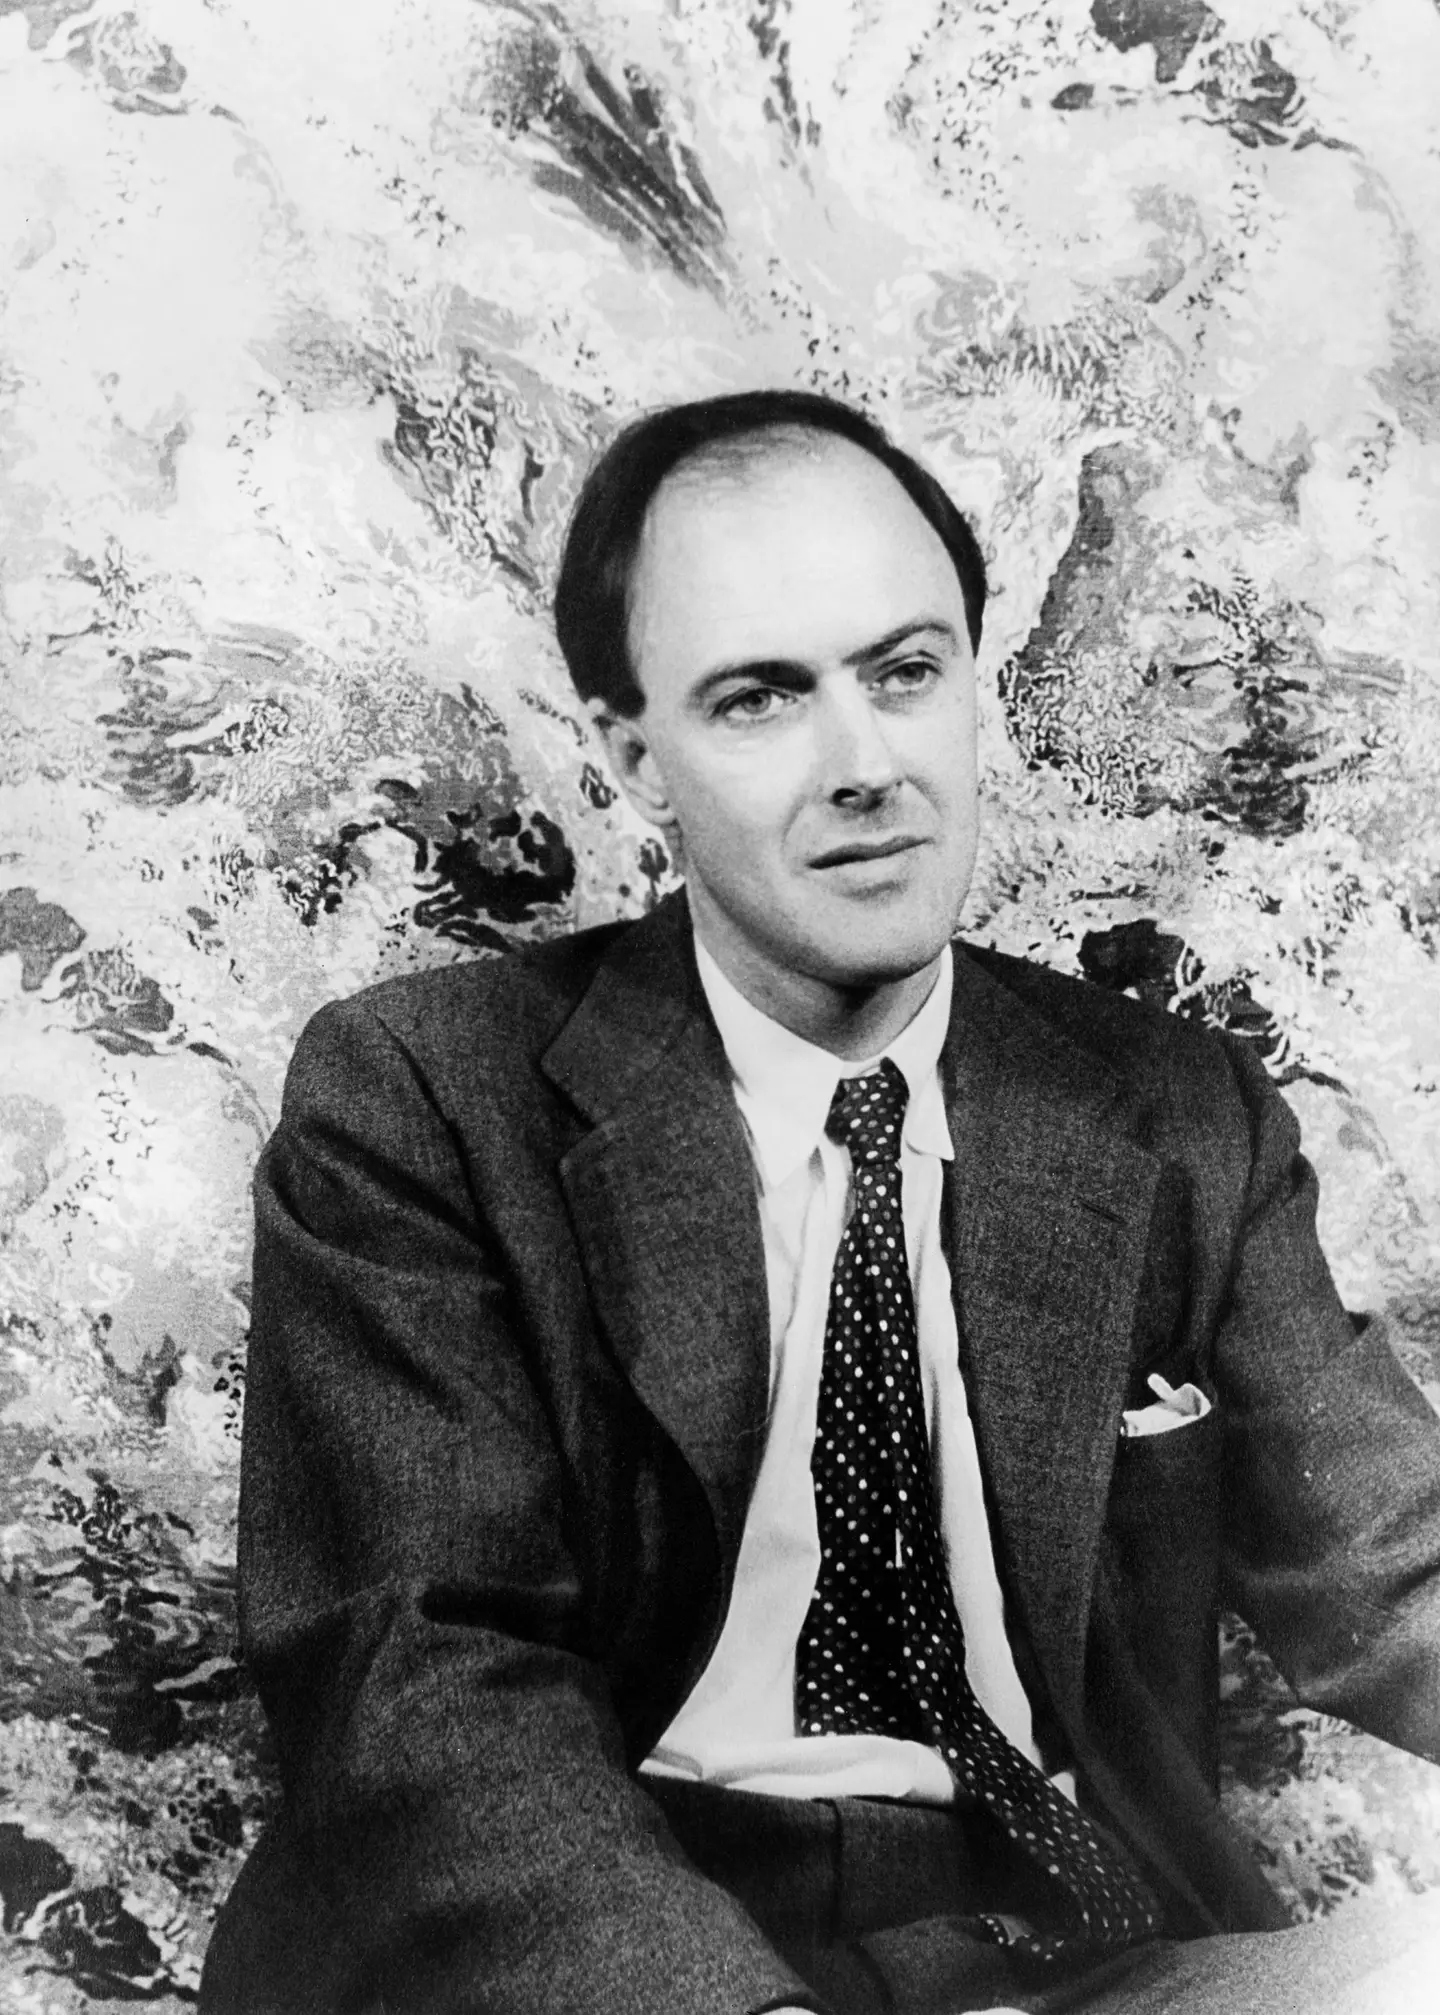 Roald Dahl, whilst successful, was a controversial figure.